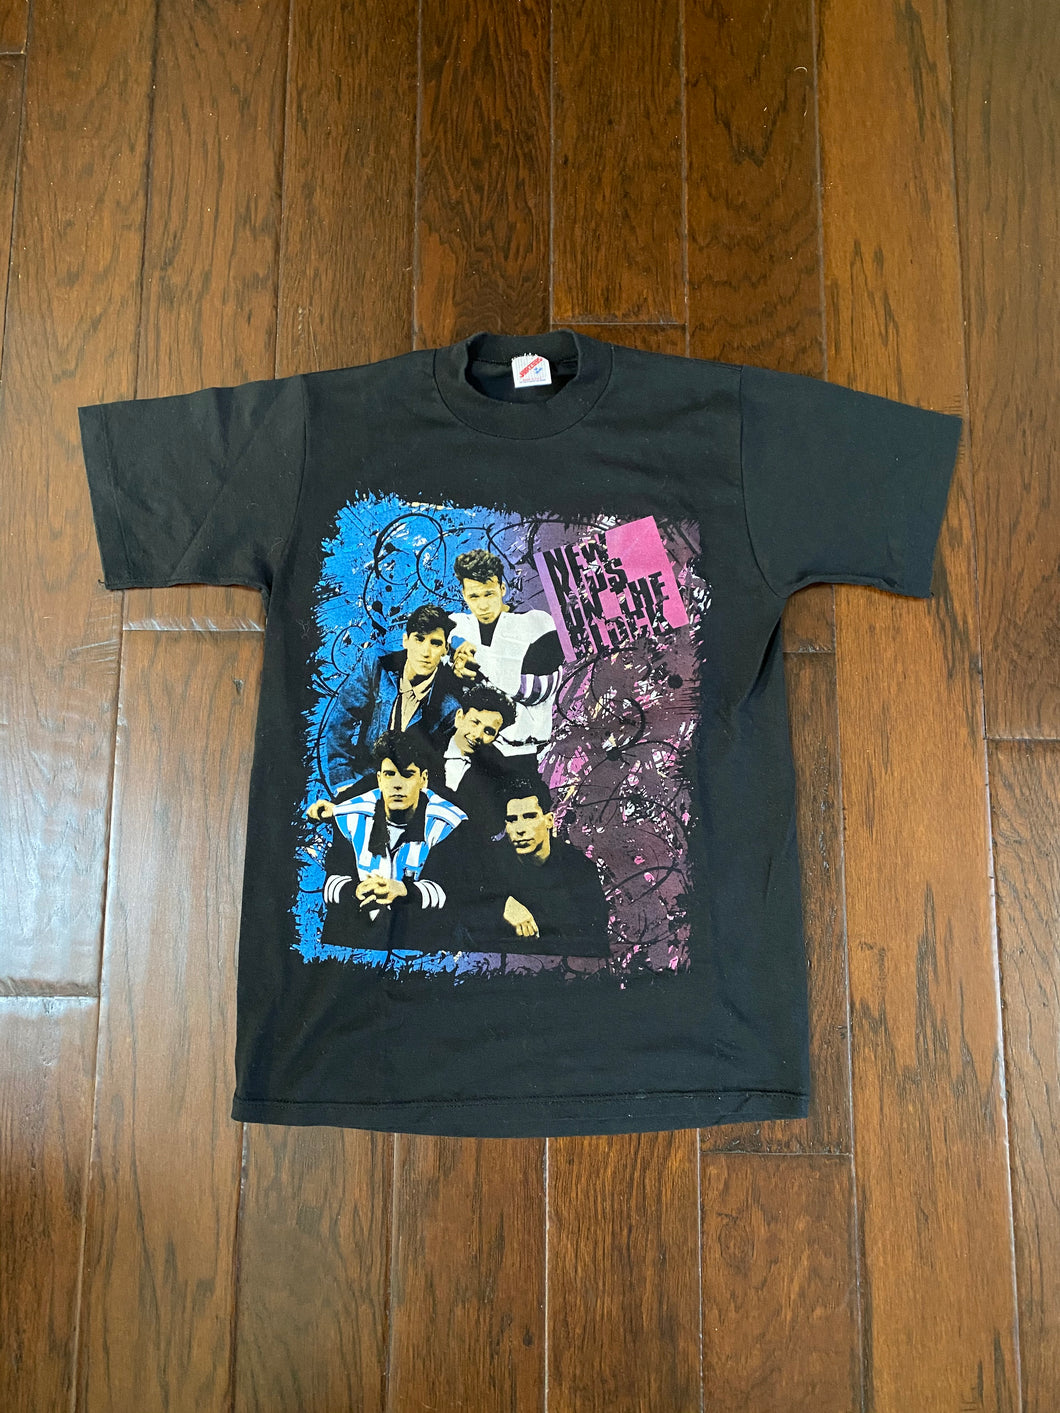 New Kids On The Block 1990 Neon Vintage Distressed Tour T-shirt